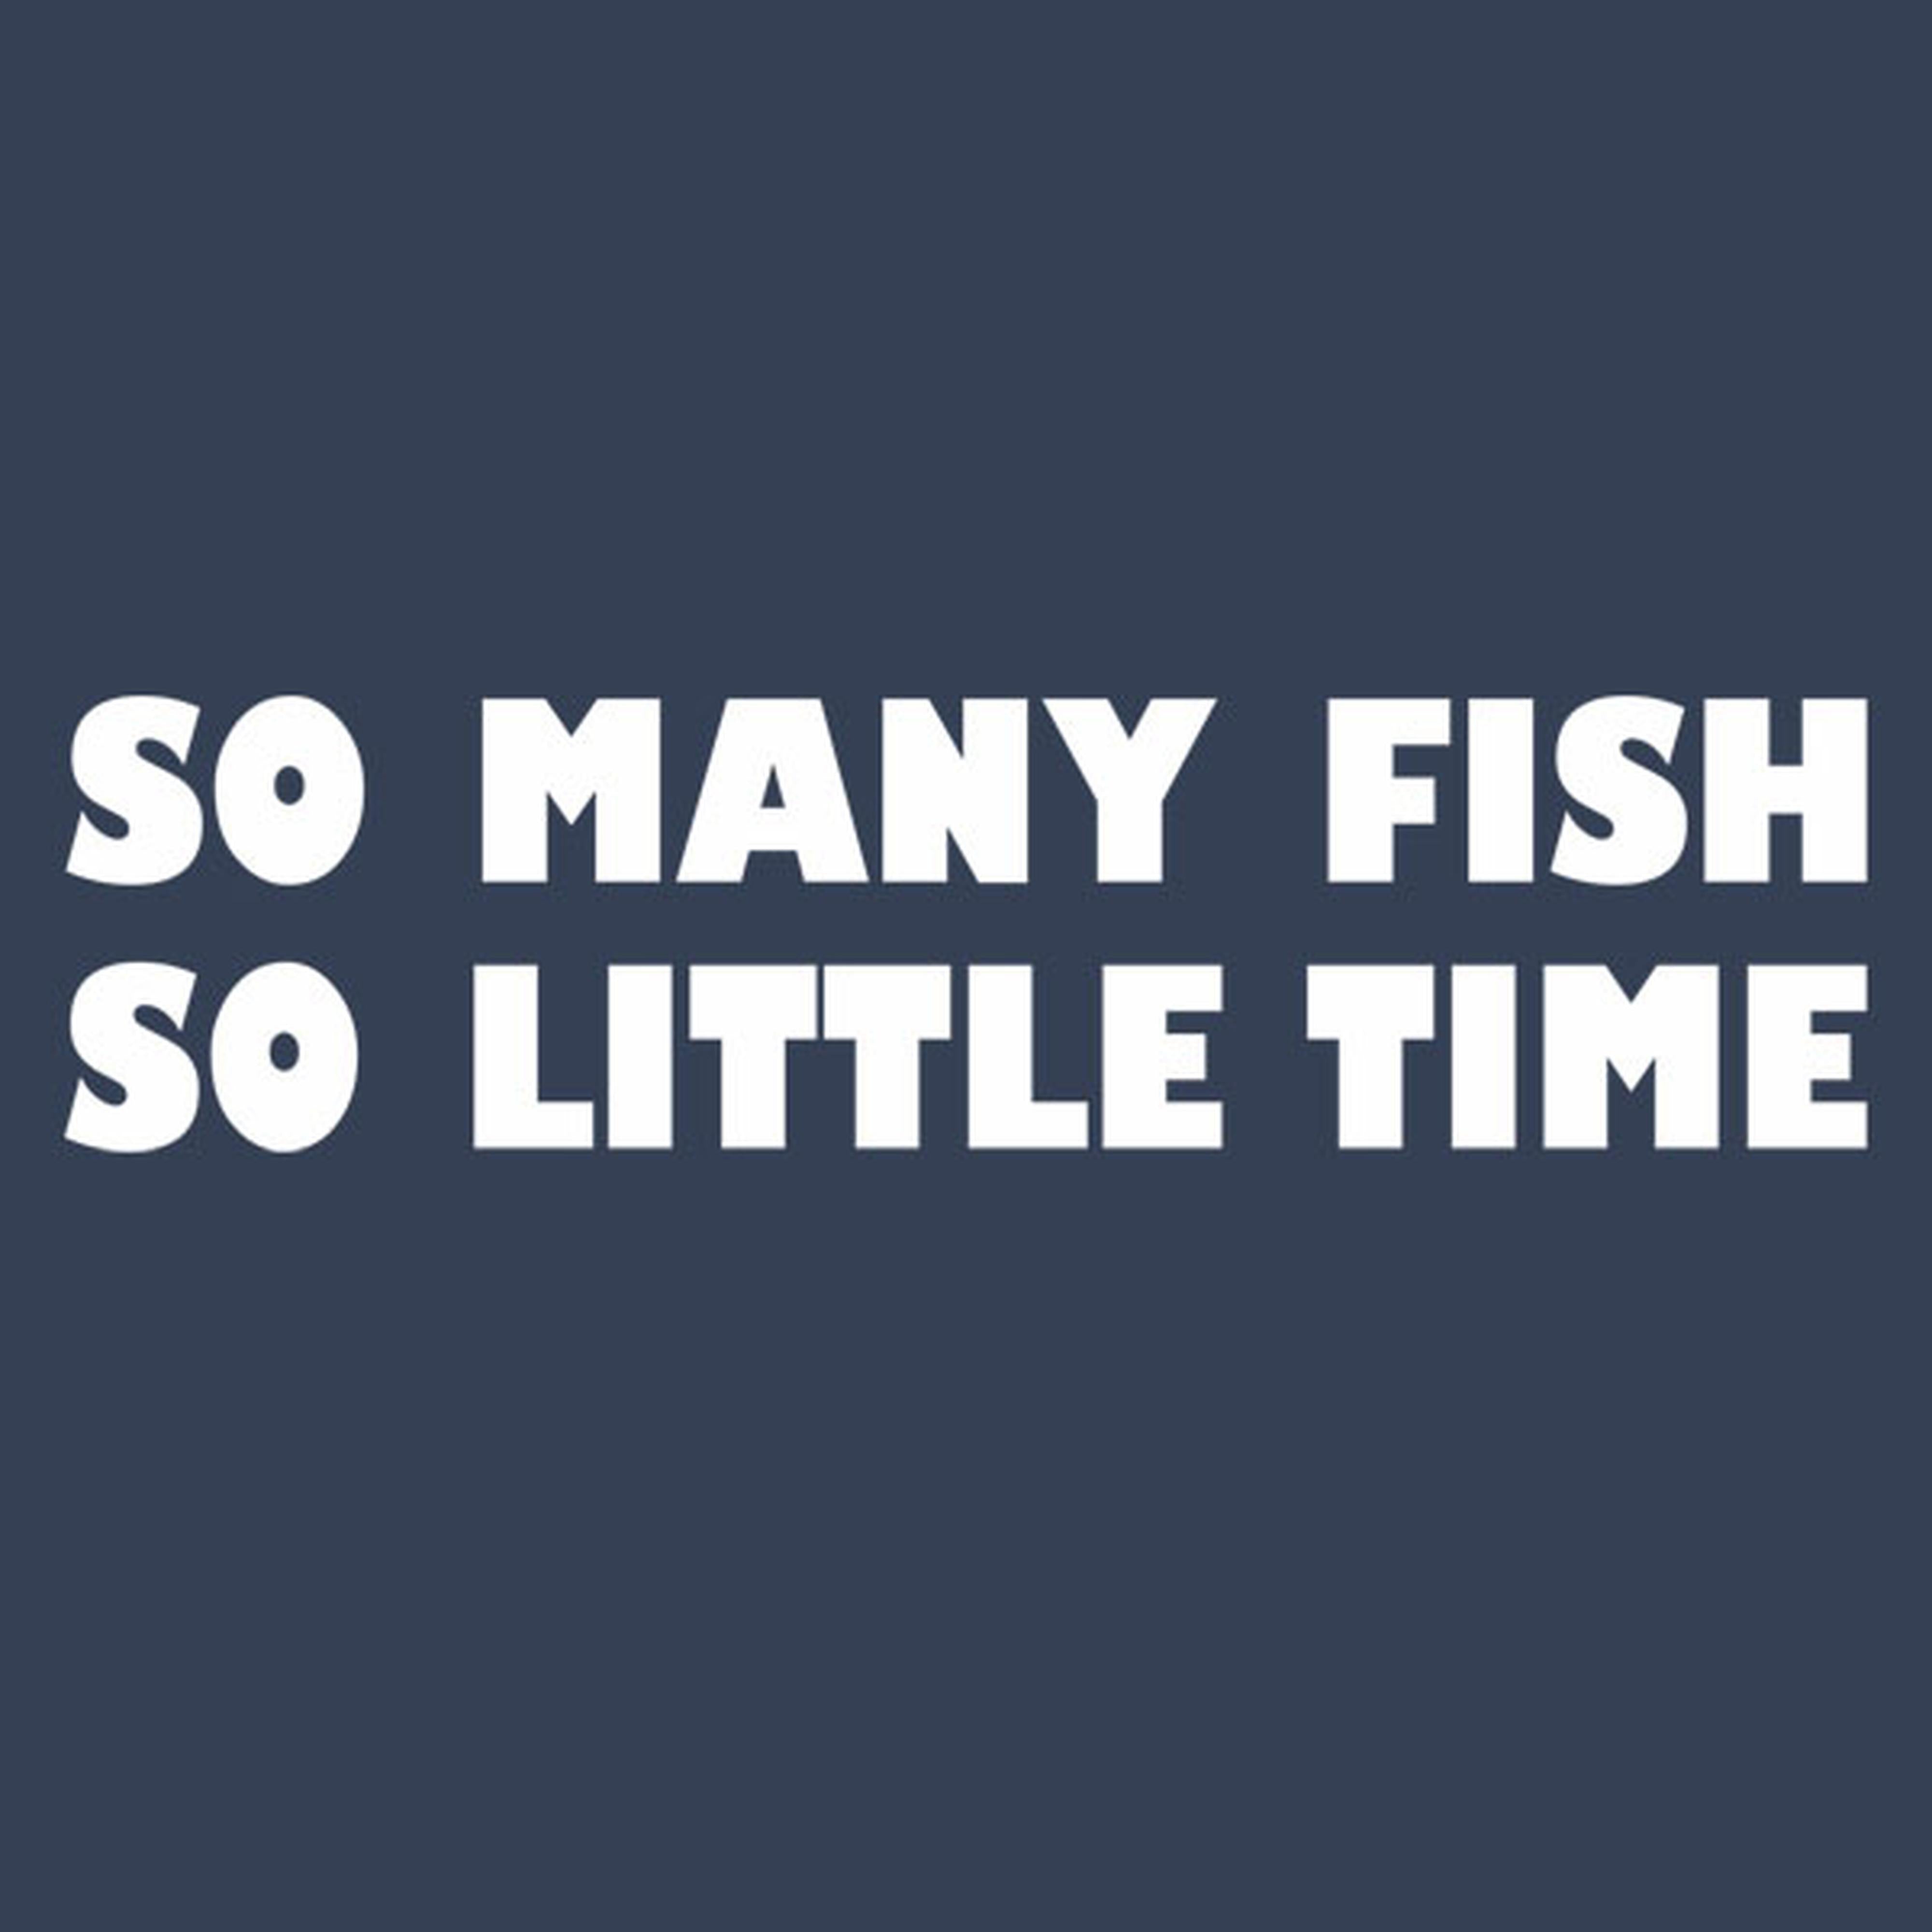 So many fish, so little time - T-shirt